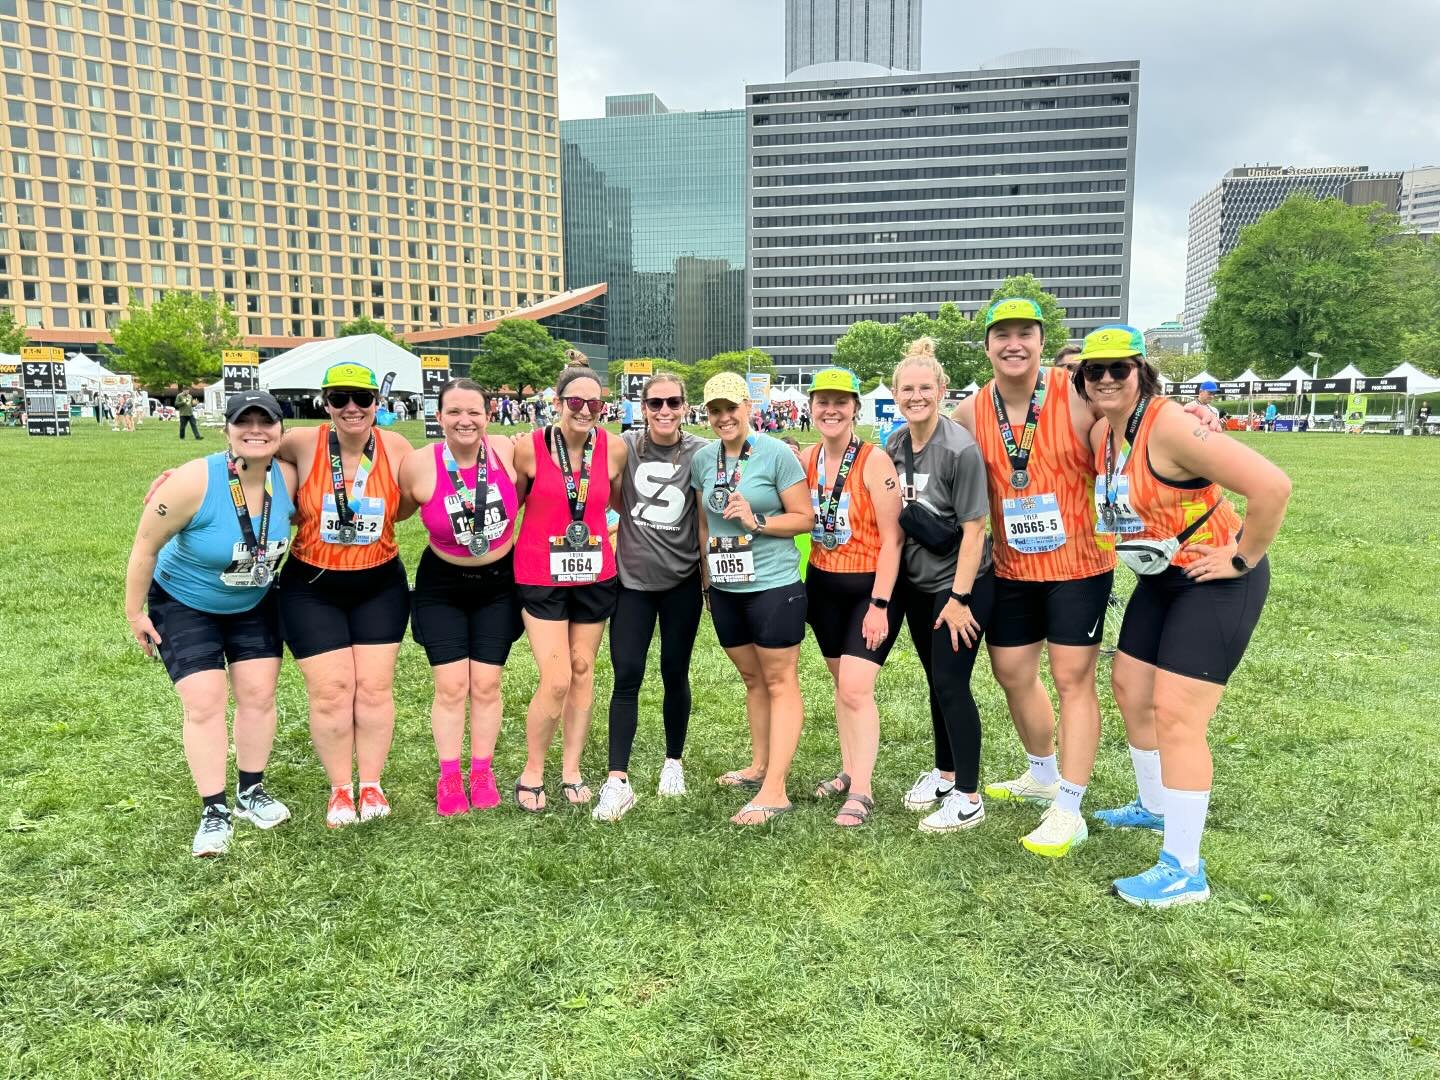 Very few words I can use to express how ~proud coach~ I felt watching this crew tear up the streets of PGH today 🥹🥹

My throat is scratchy by heart is SO full of gratitude that @the.running.rosen &amp; I decided to start @sfsrunners two years ago w